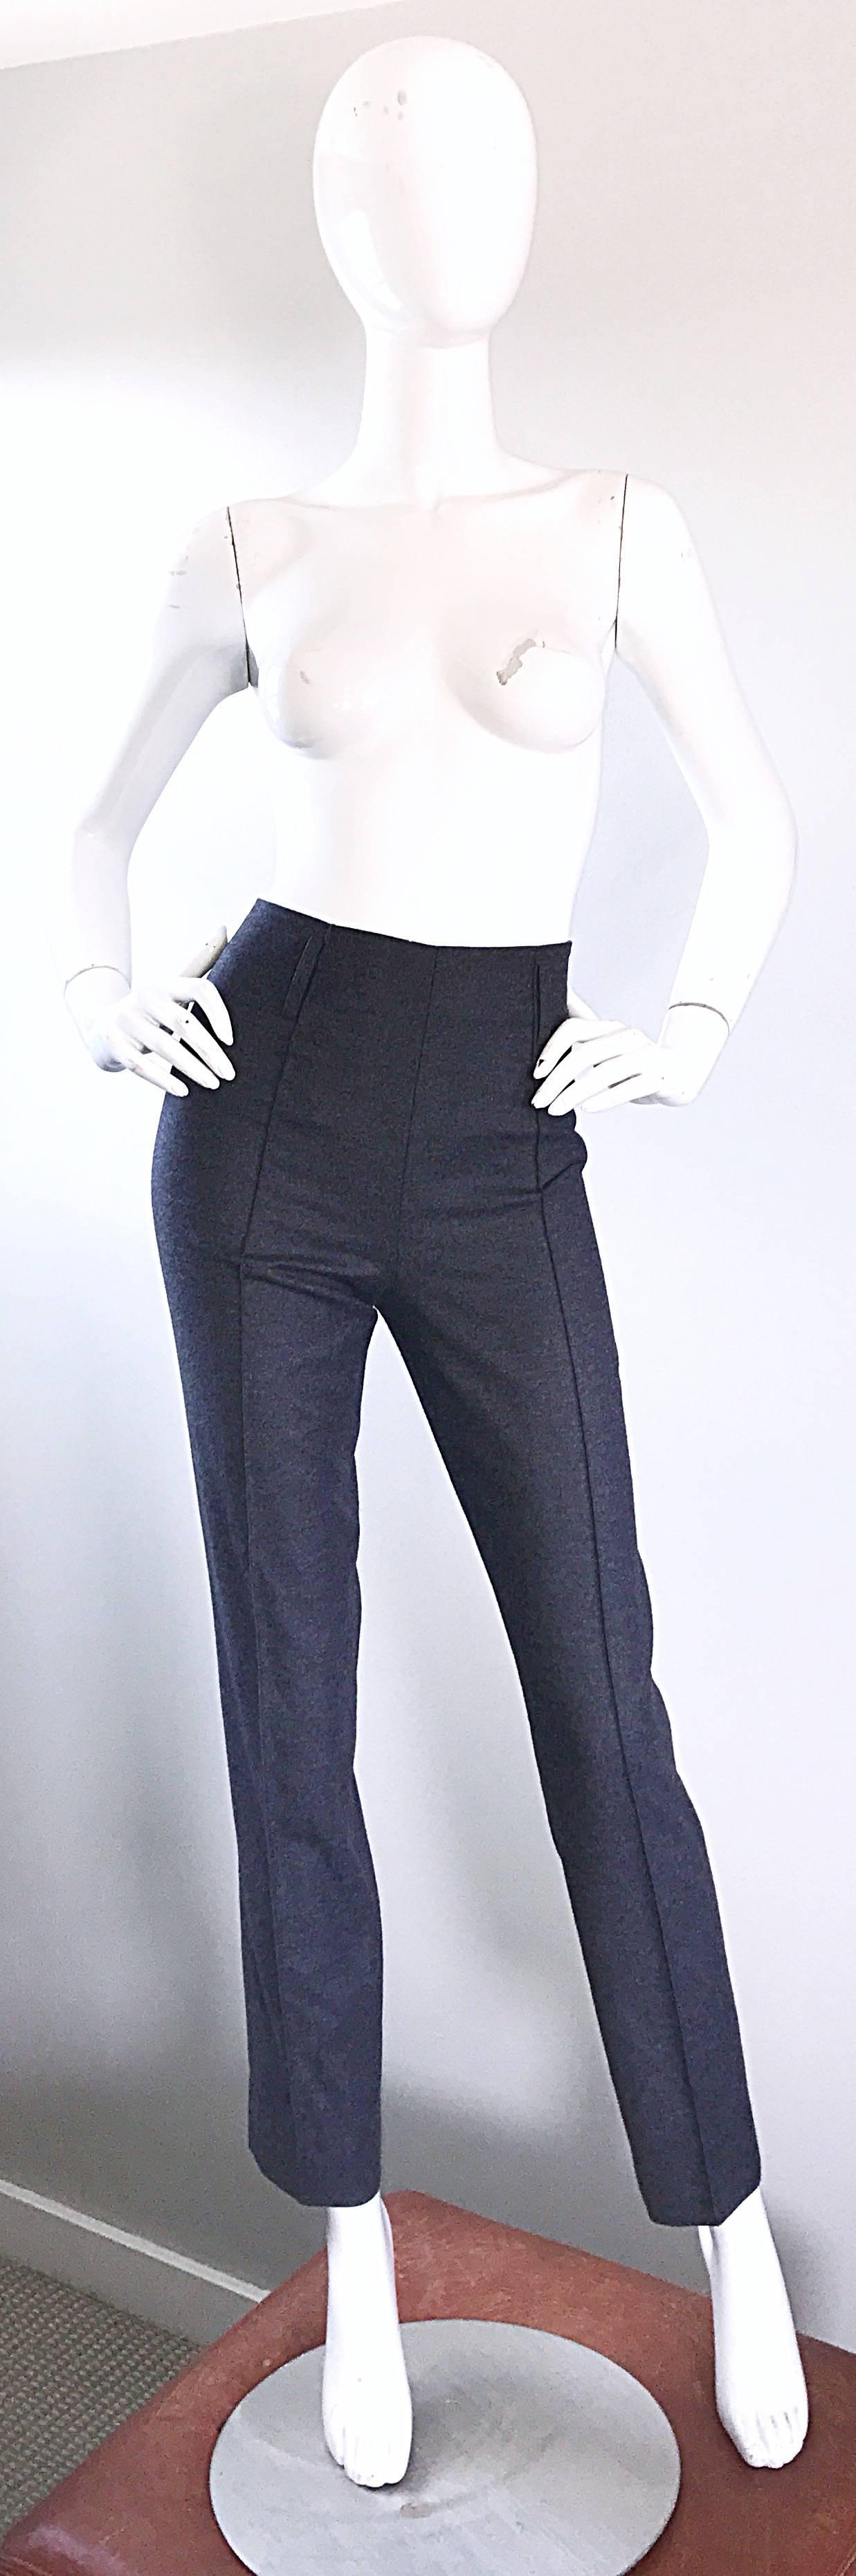 Chic Autumn/Winter 2007 YVES SAINT LAURENT Rive Guache ' by STEFANO PILATI YSL high waisted charcoal gray virgin wool and cashmere slim cigarette trousers! Features a stylish high waist, with slim fitting tailored legs. Single seam down the center,